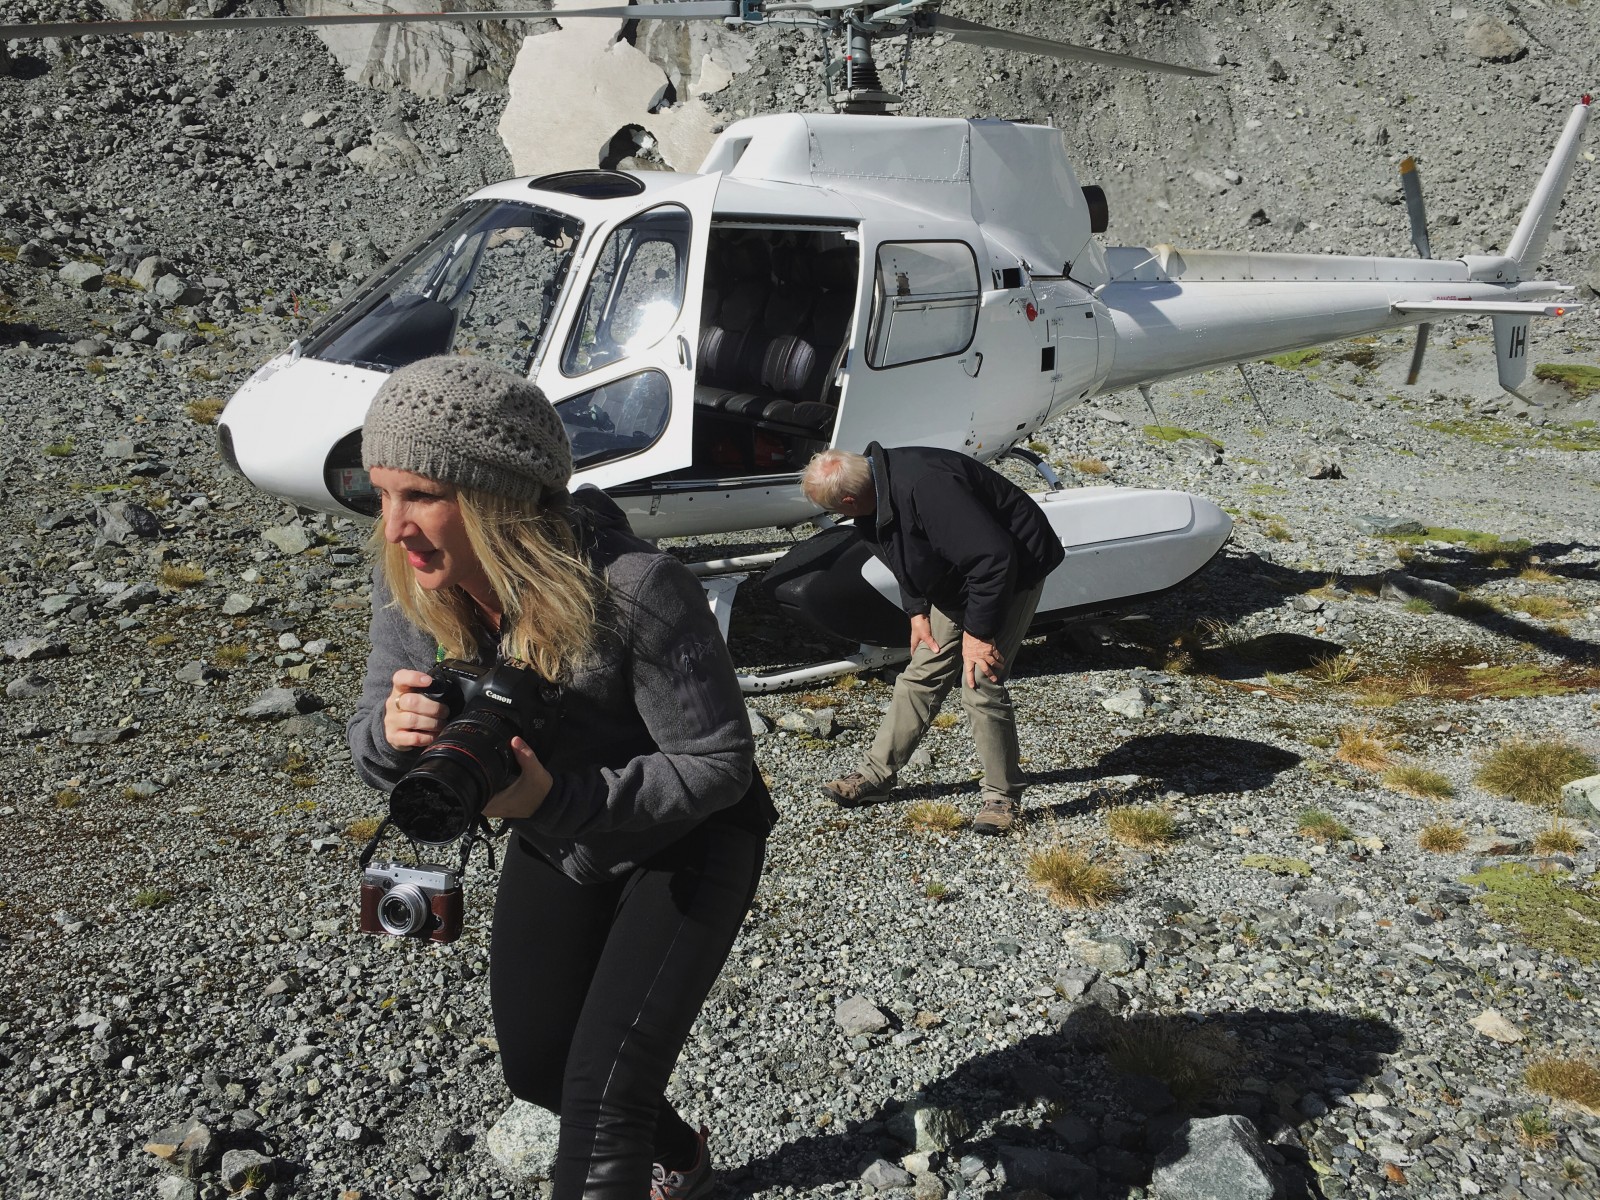 Here I am exiting the helicopter to explore the Fiordland